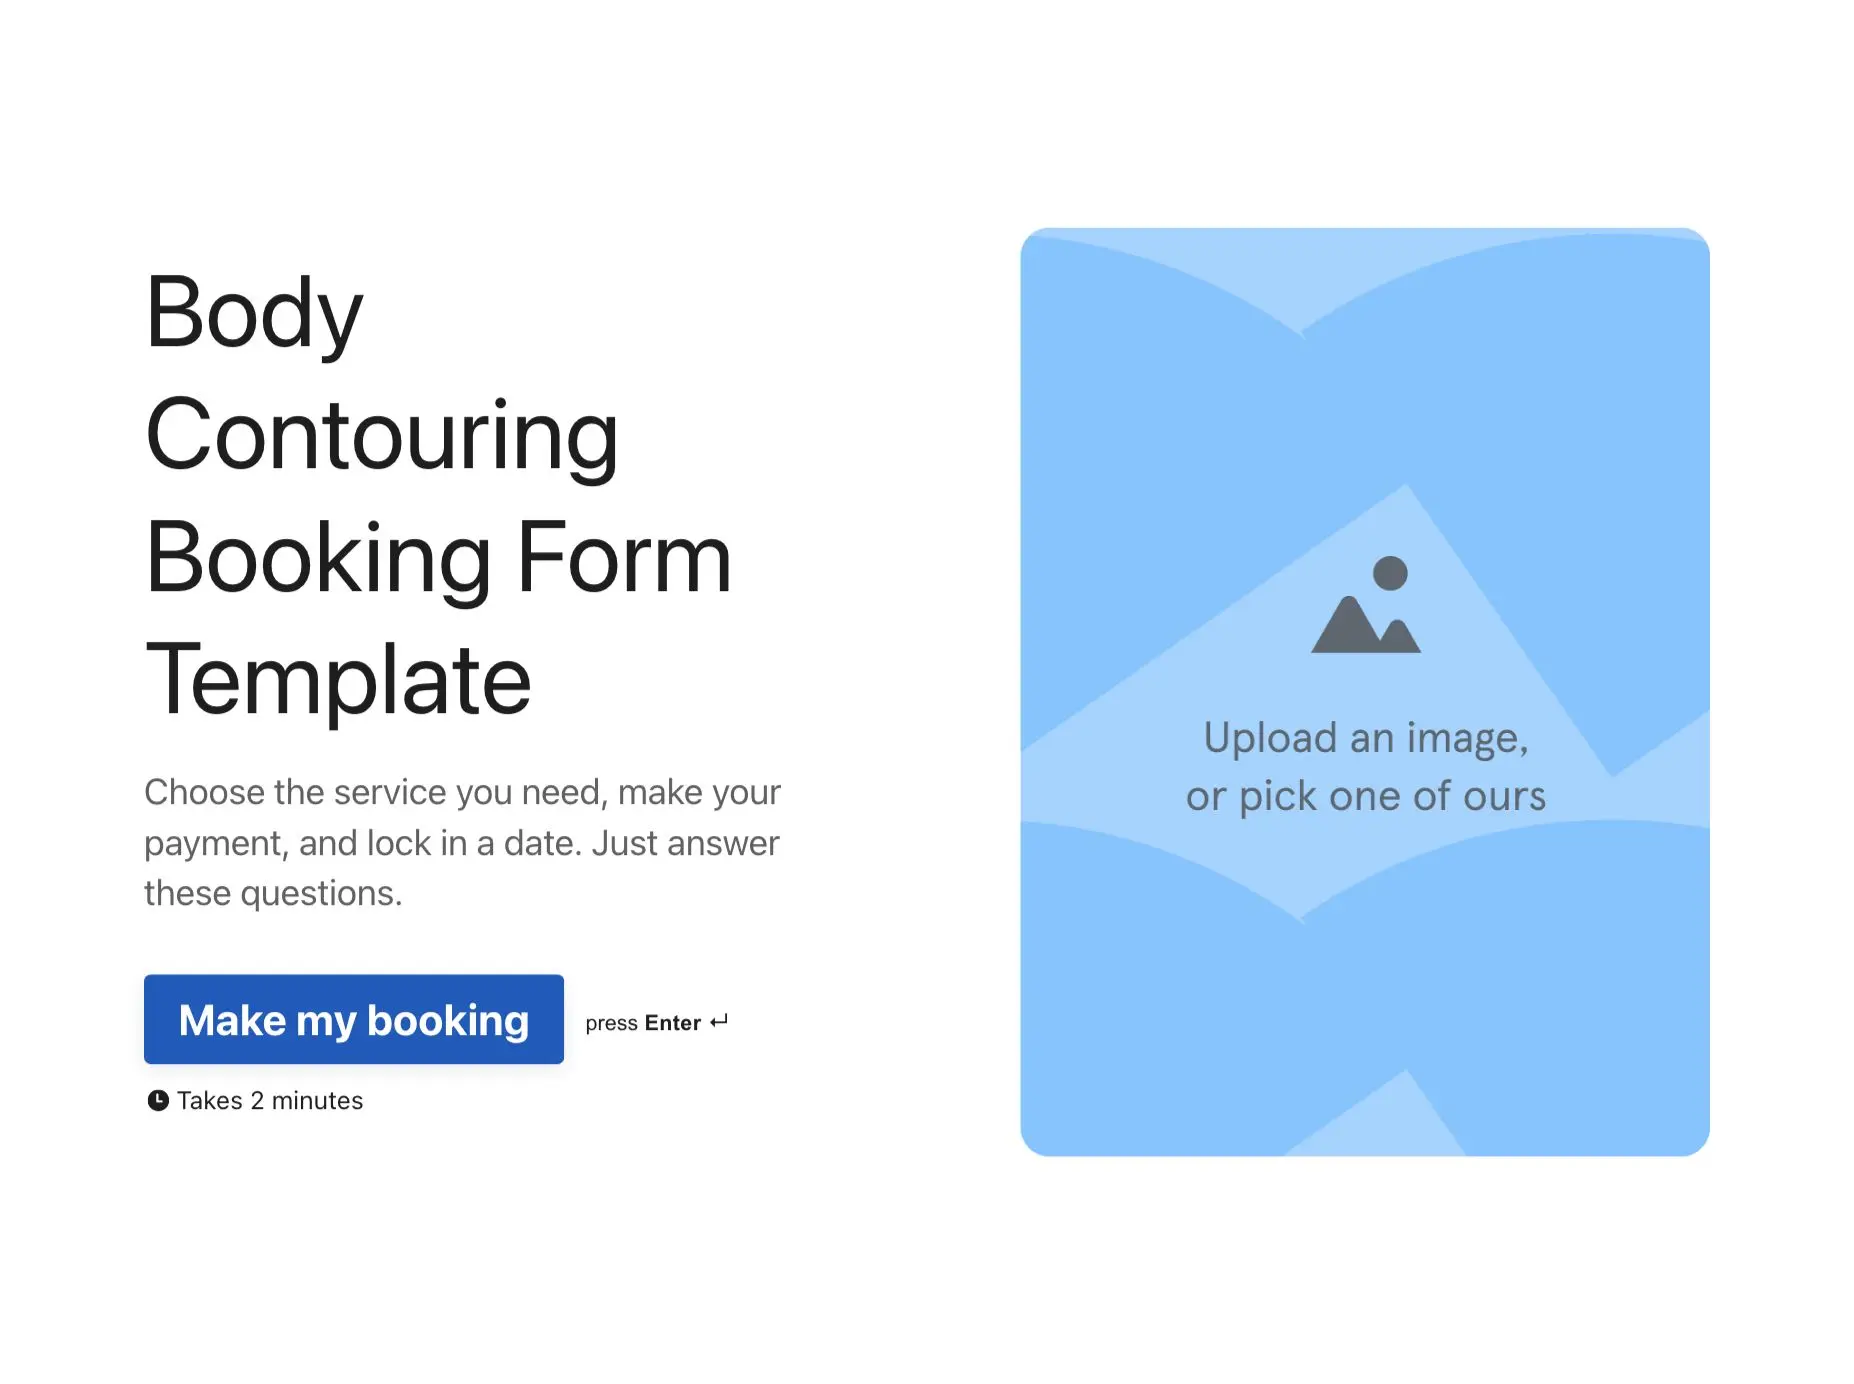 Body Contouring Booking Form Template Hero